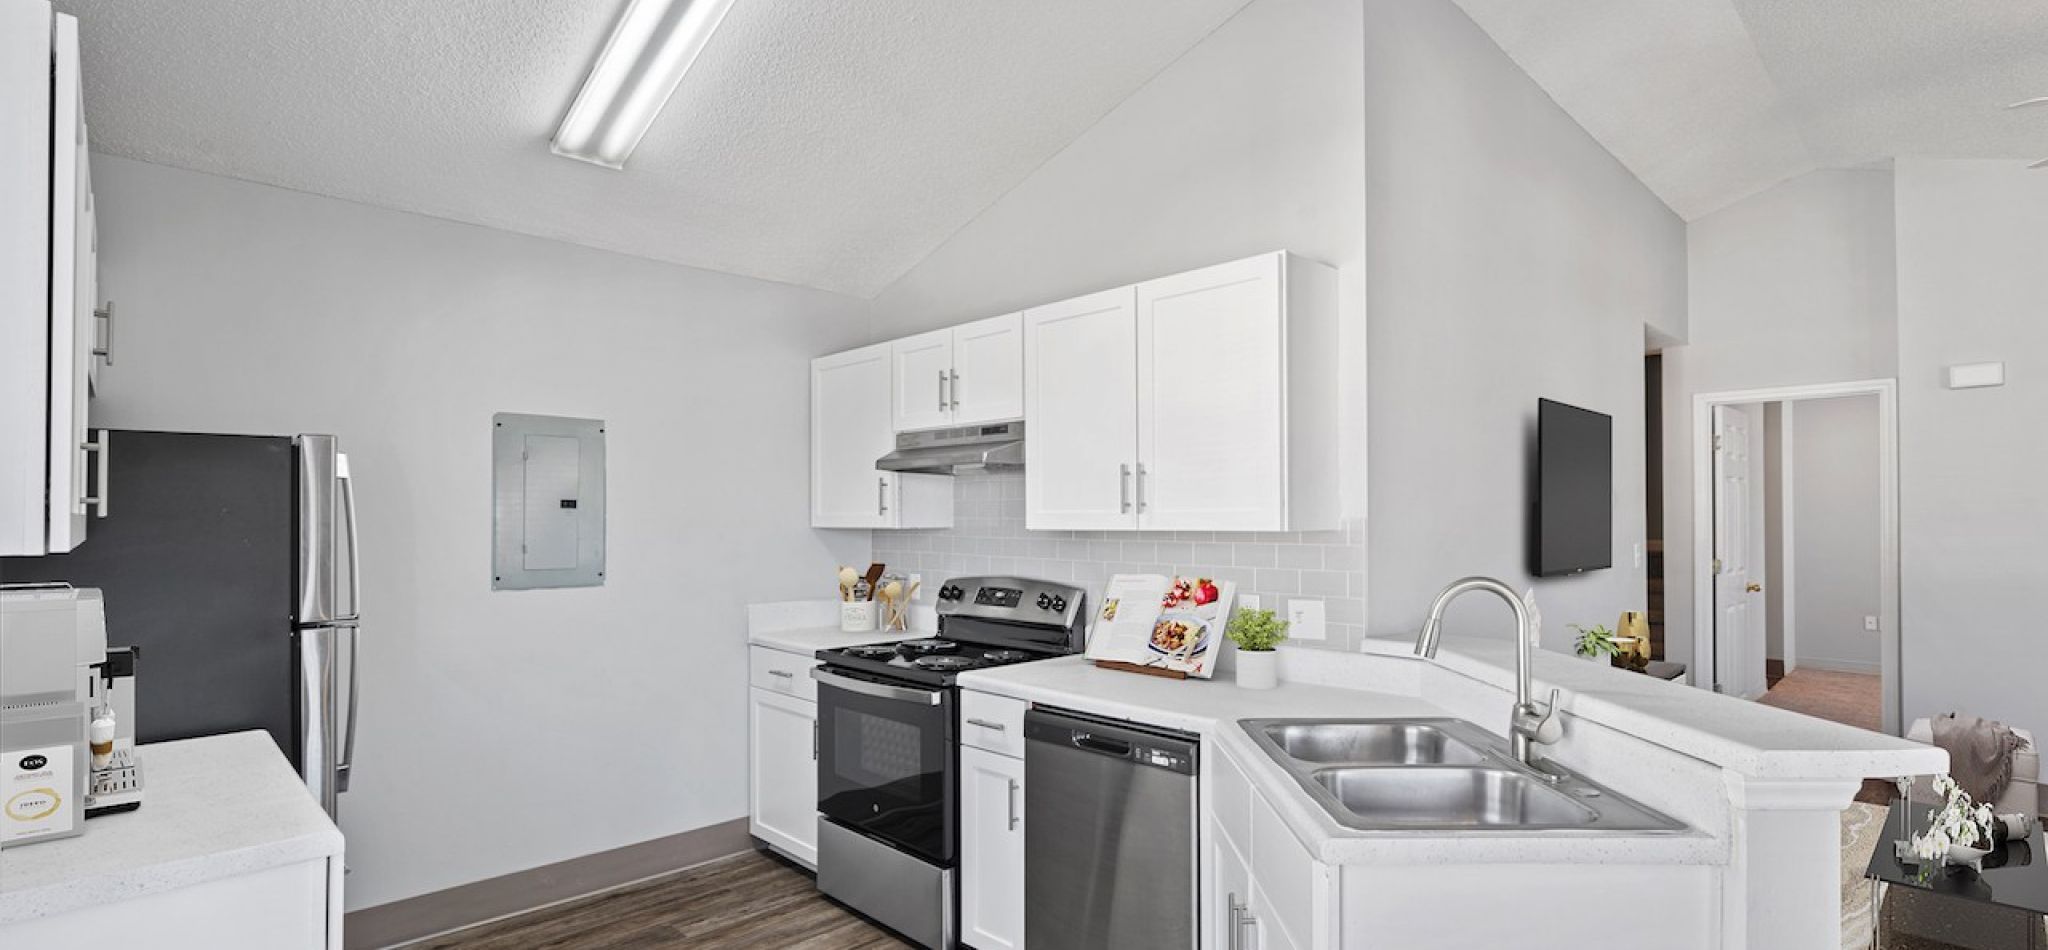 Hawthorne at the Pines bright kitchen space with white cabinets, stainless steel appliances, and a subway tile backsplash, with a flat-screen TV on the wall